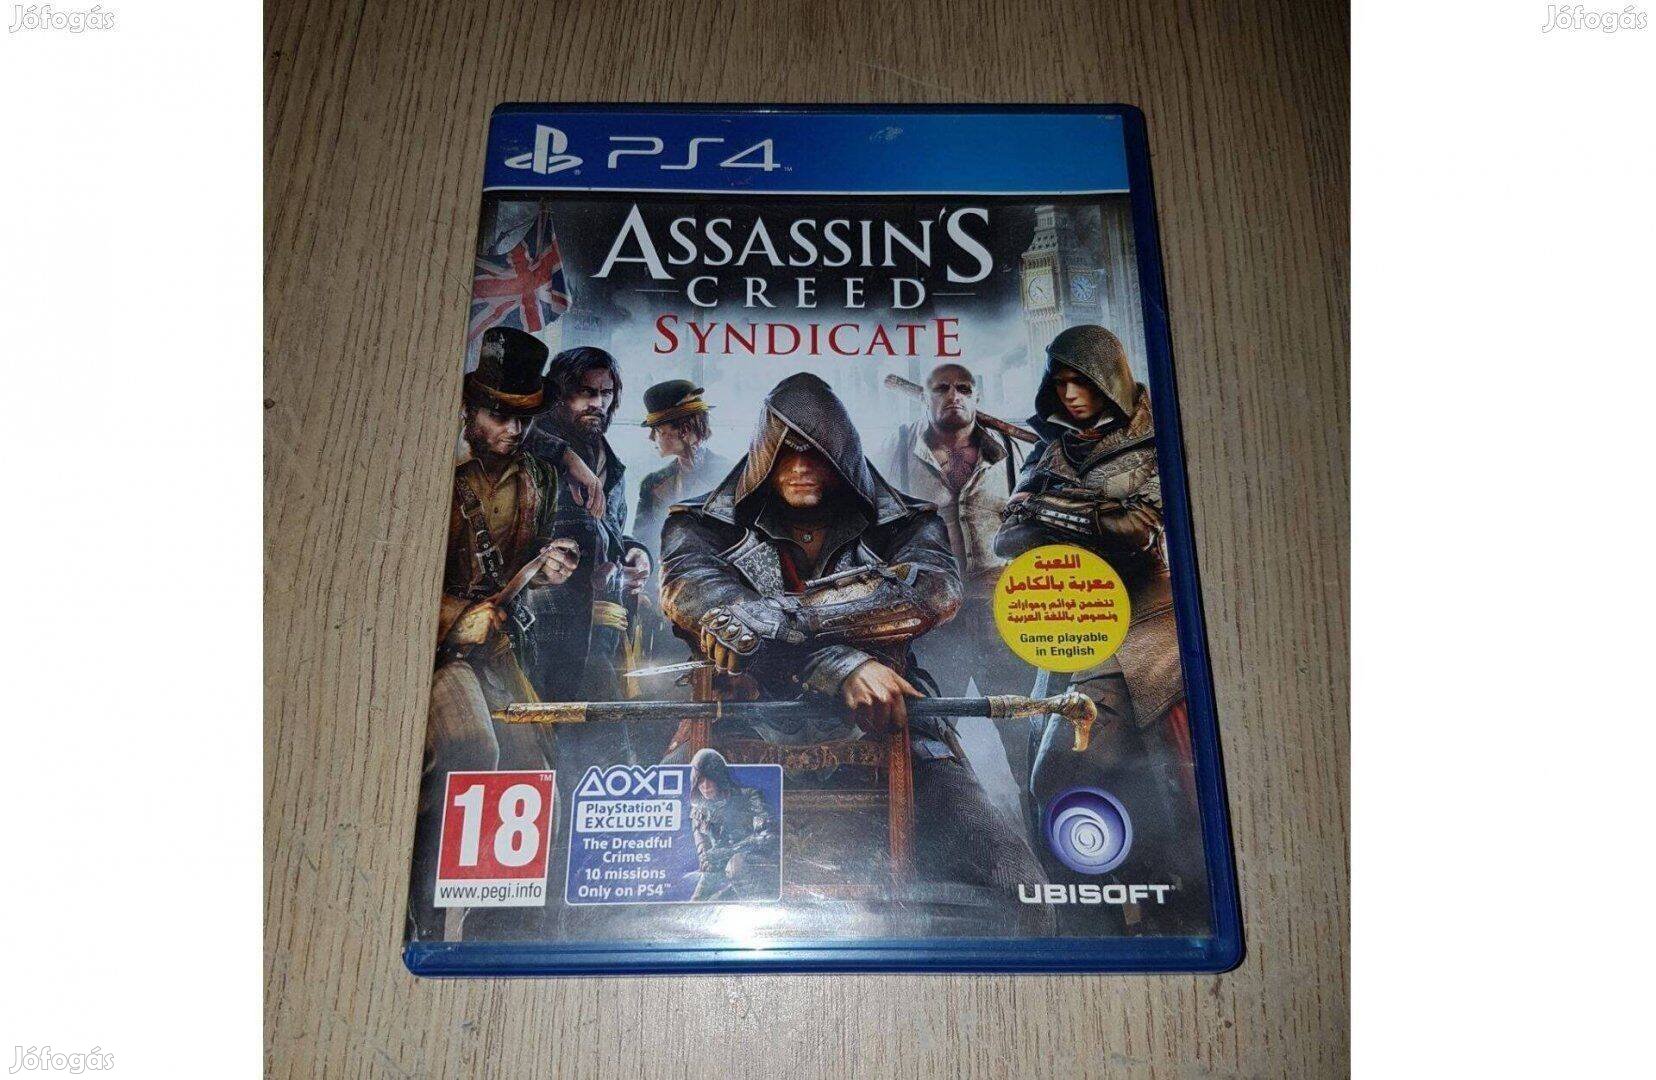 Ps4 assassin's creed syndicate eladó